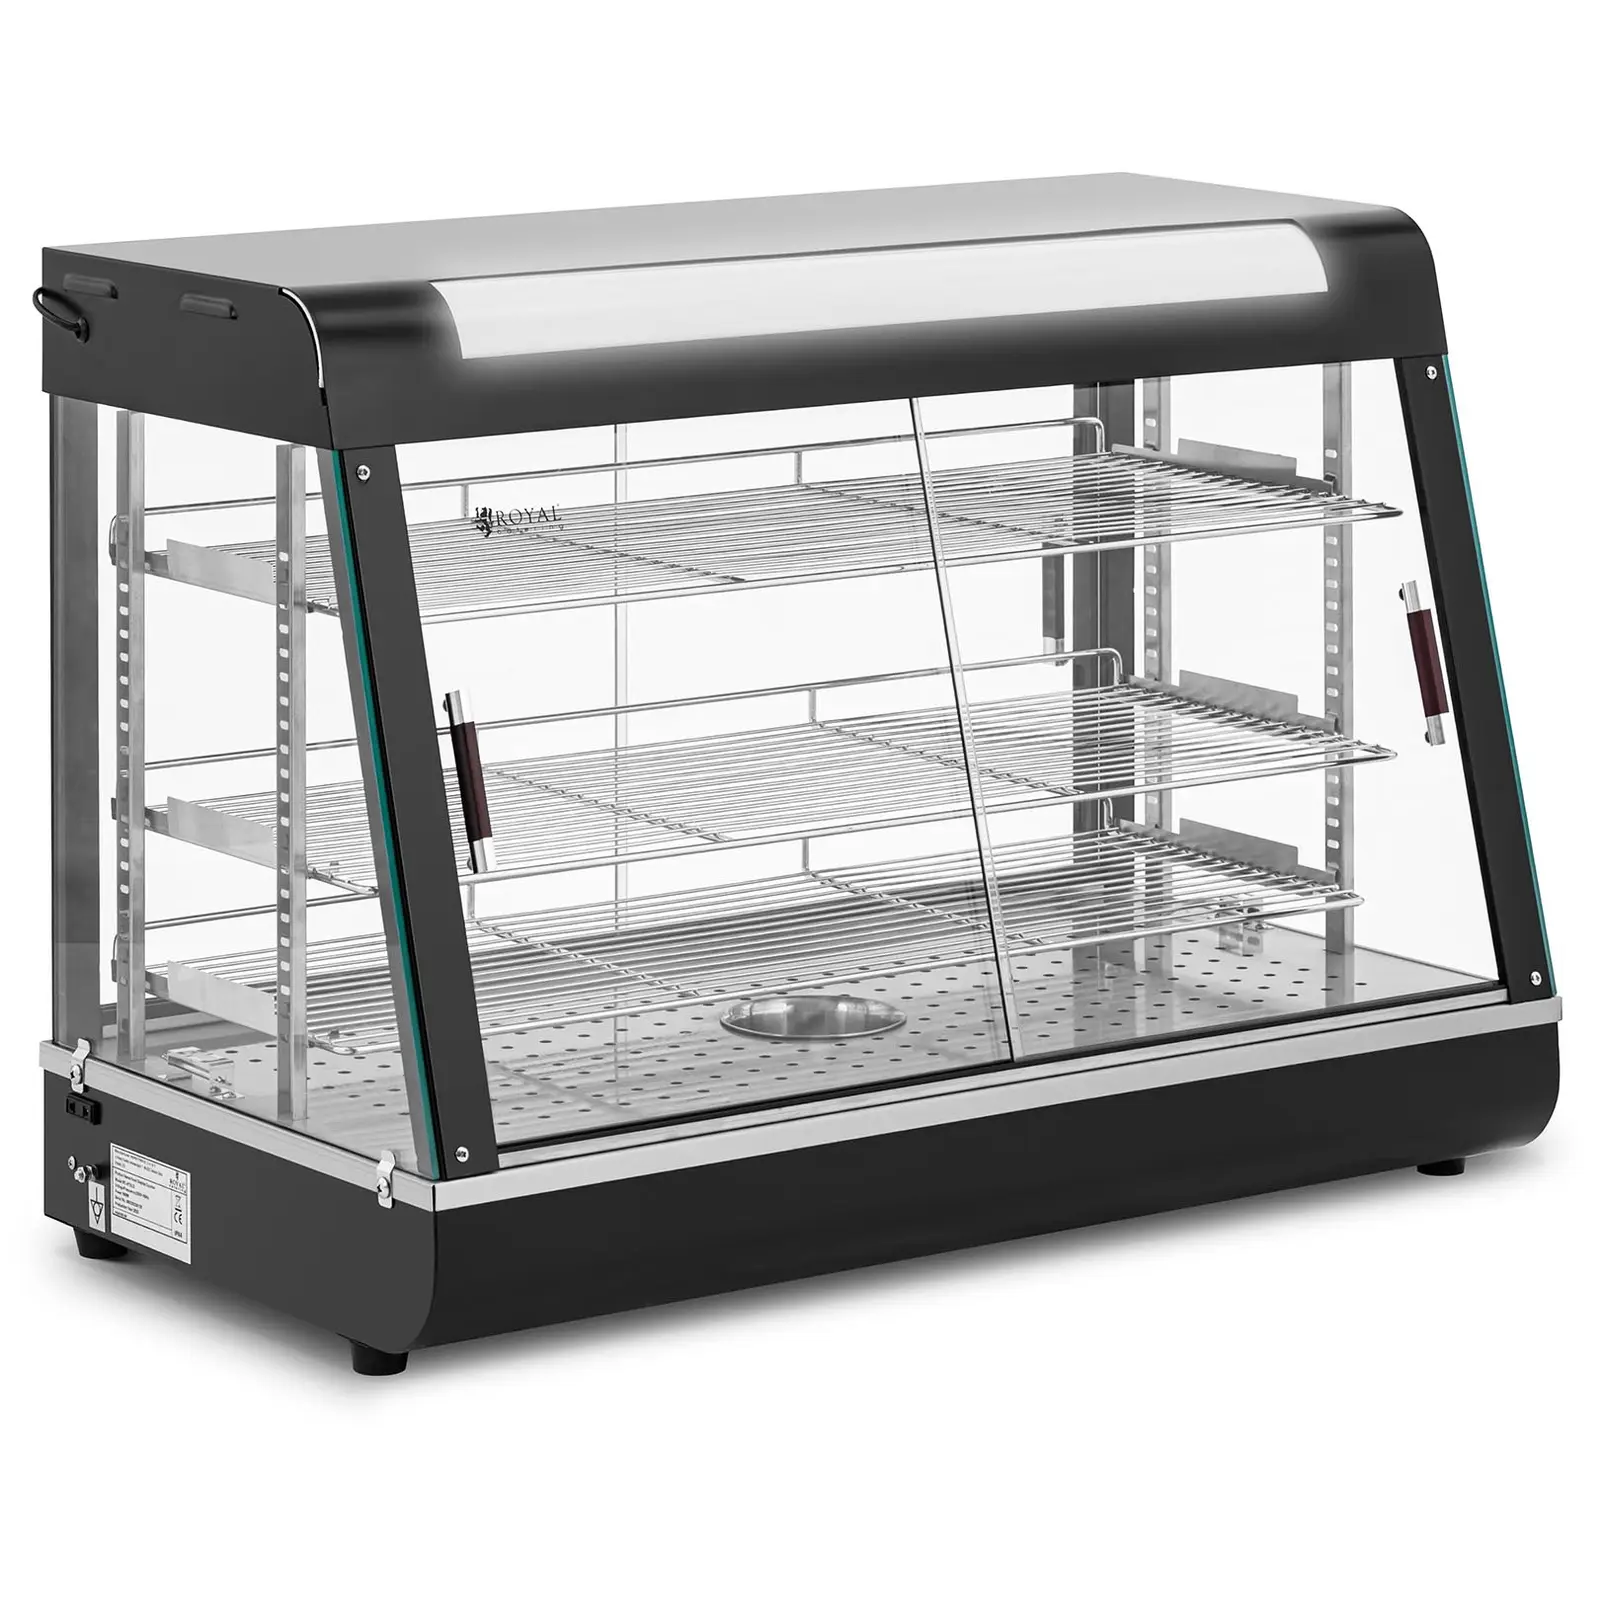 Hot bar - 150 L - 1600 W - 3 storage grids - Royal Catering